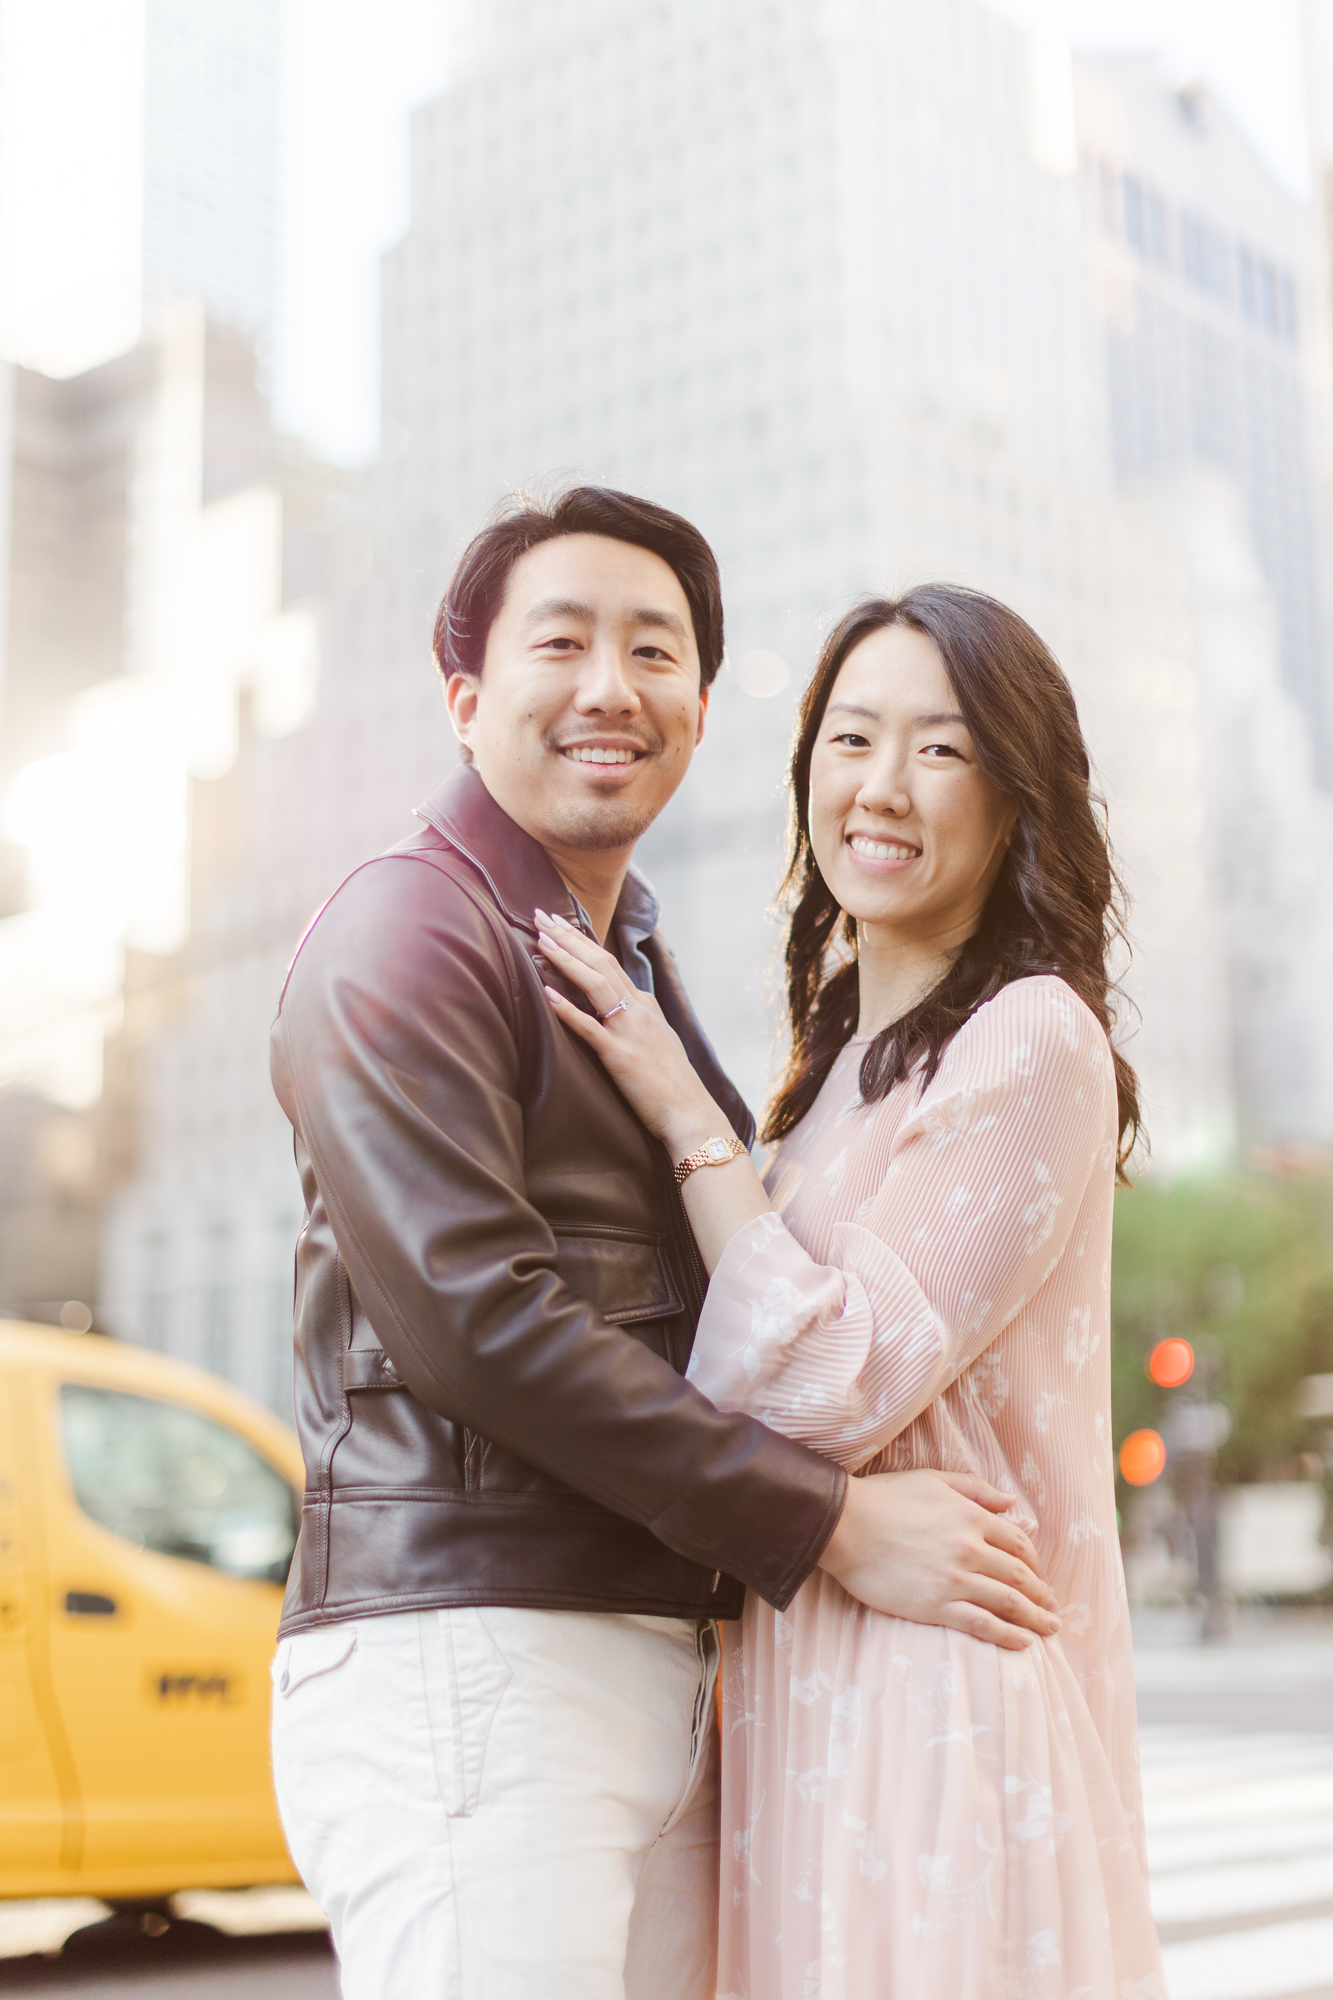 Beautiful Central Park Engagement Photos in the Spring